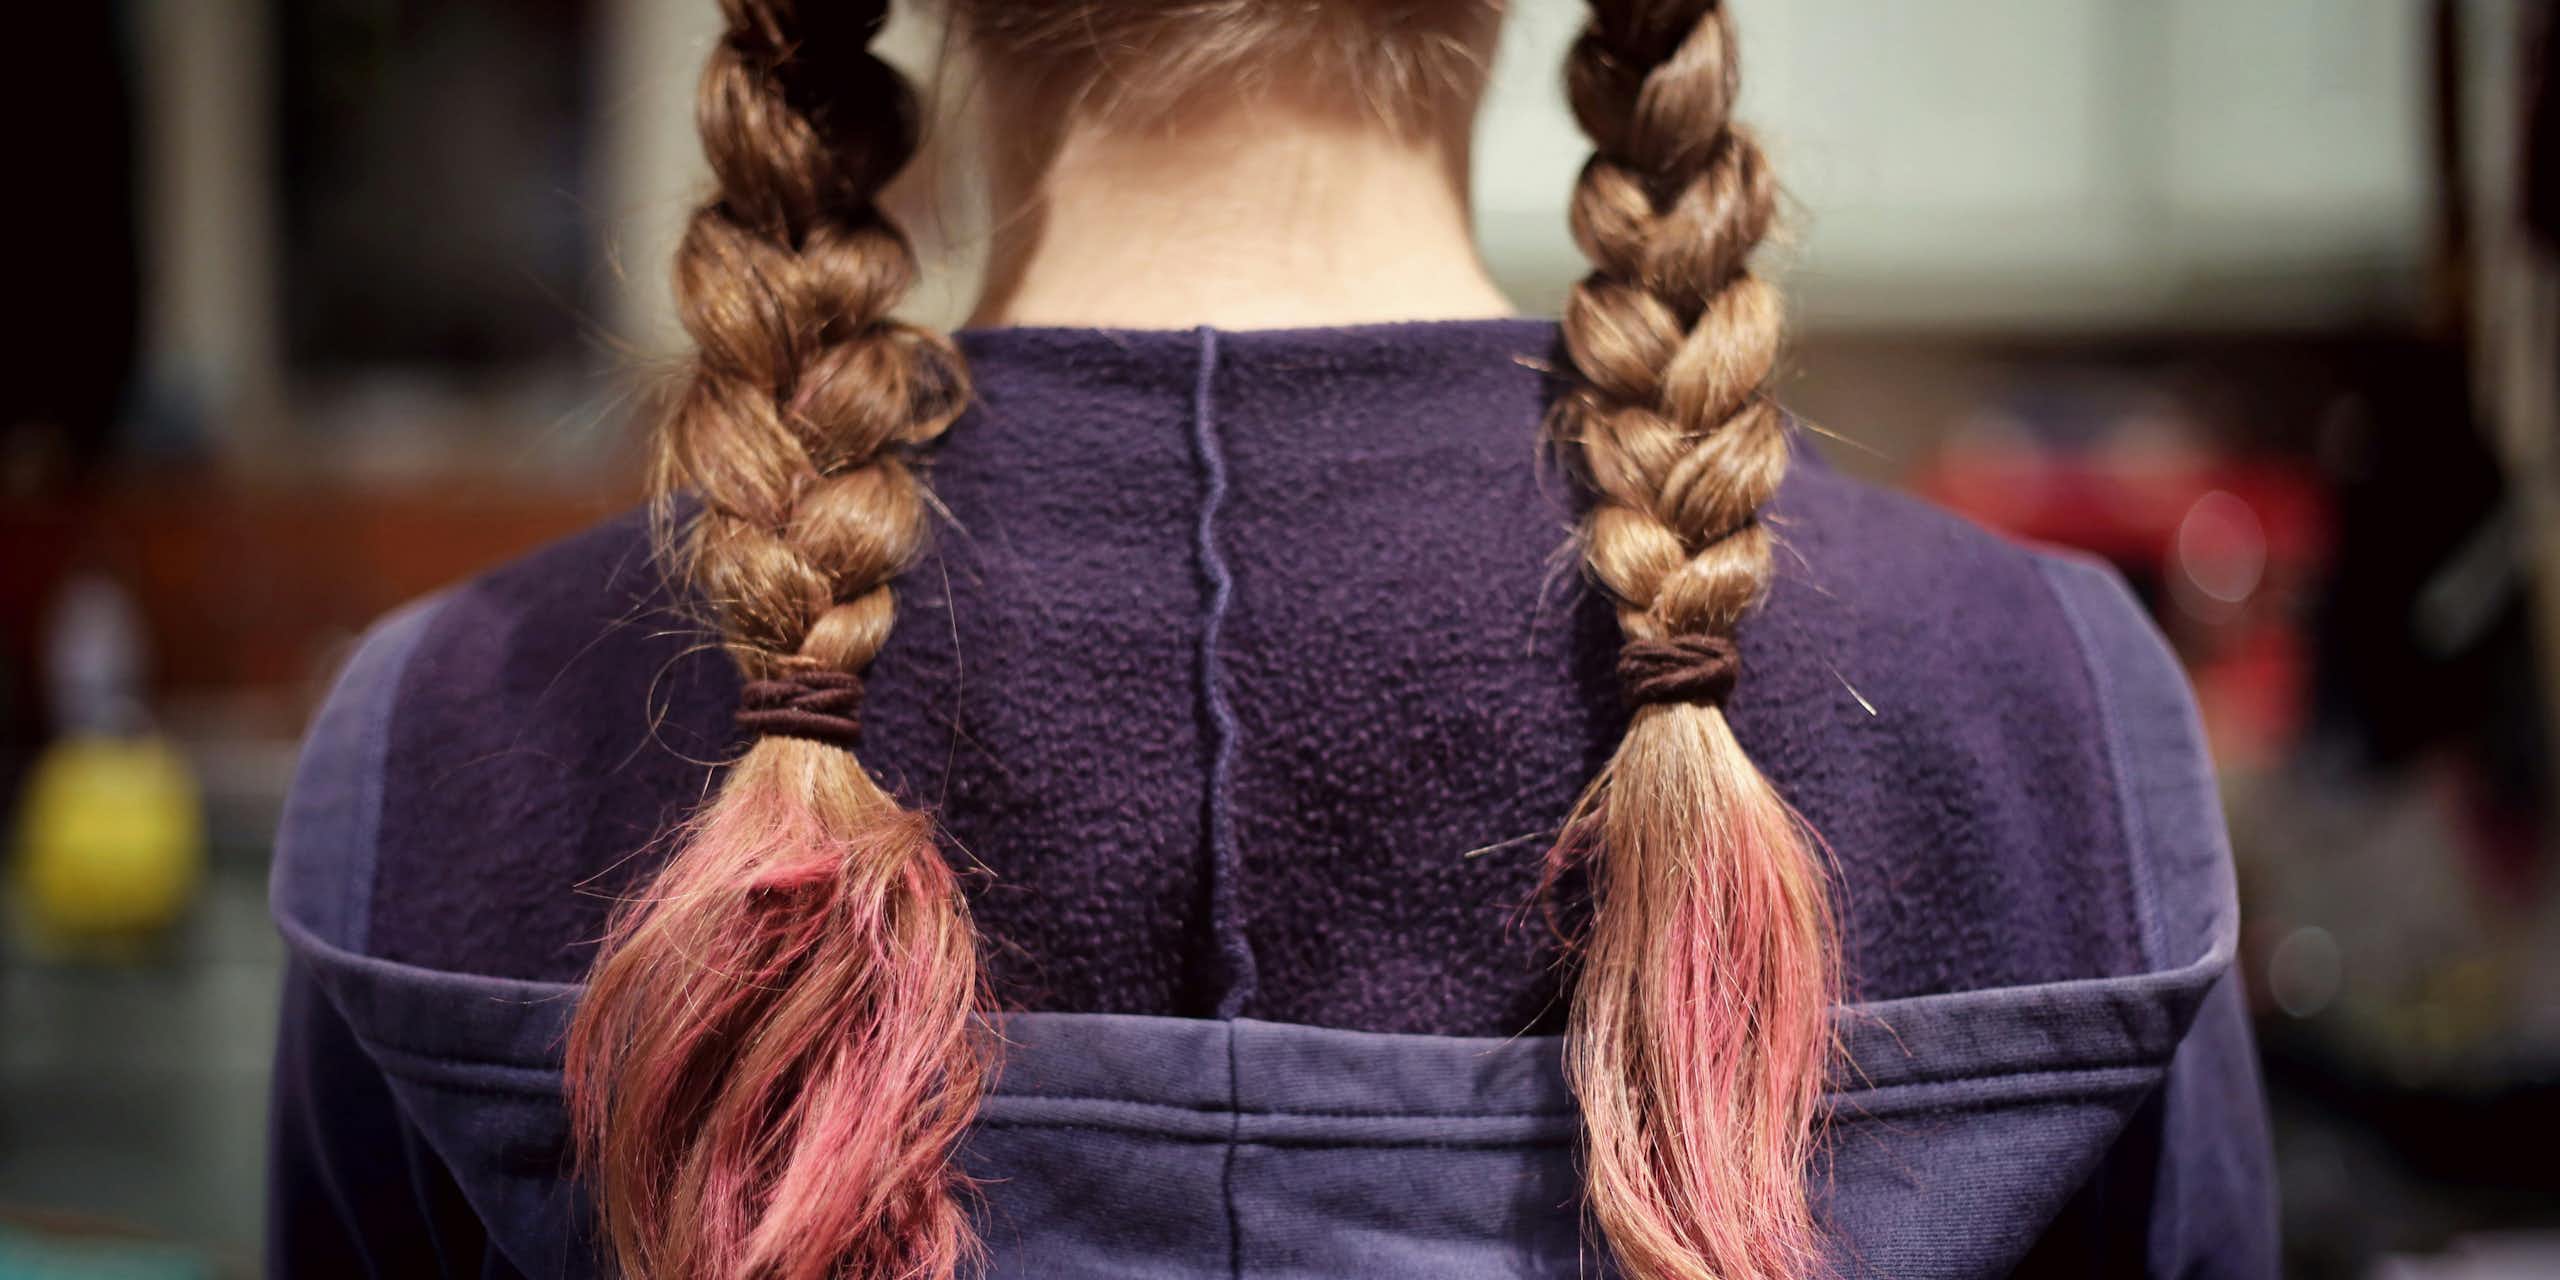 A young person stands with their back to the camera. They have a hoodie jumper on and blonde braided pigtails died pink at the ends. 